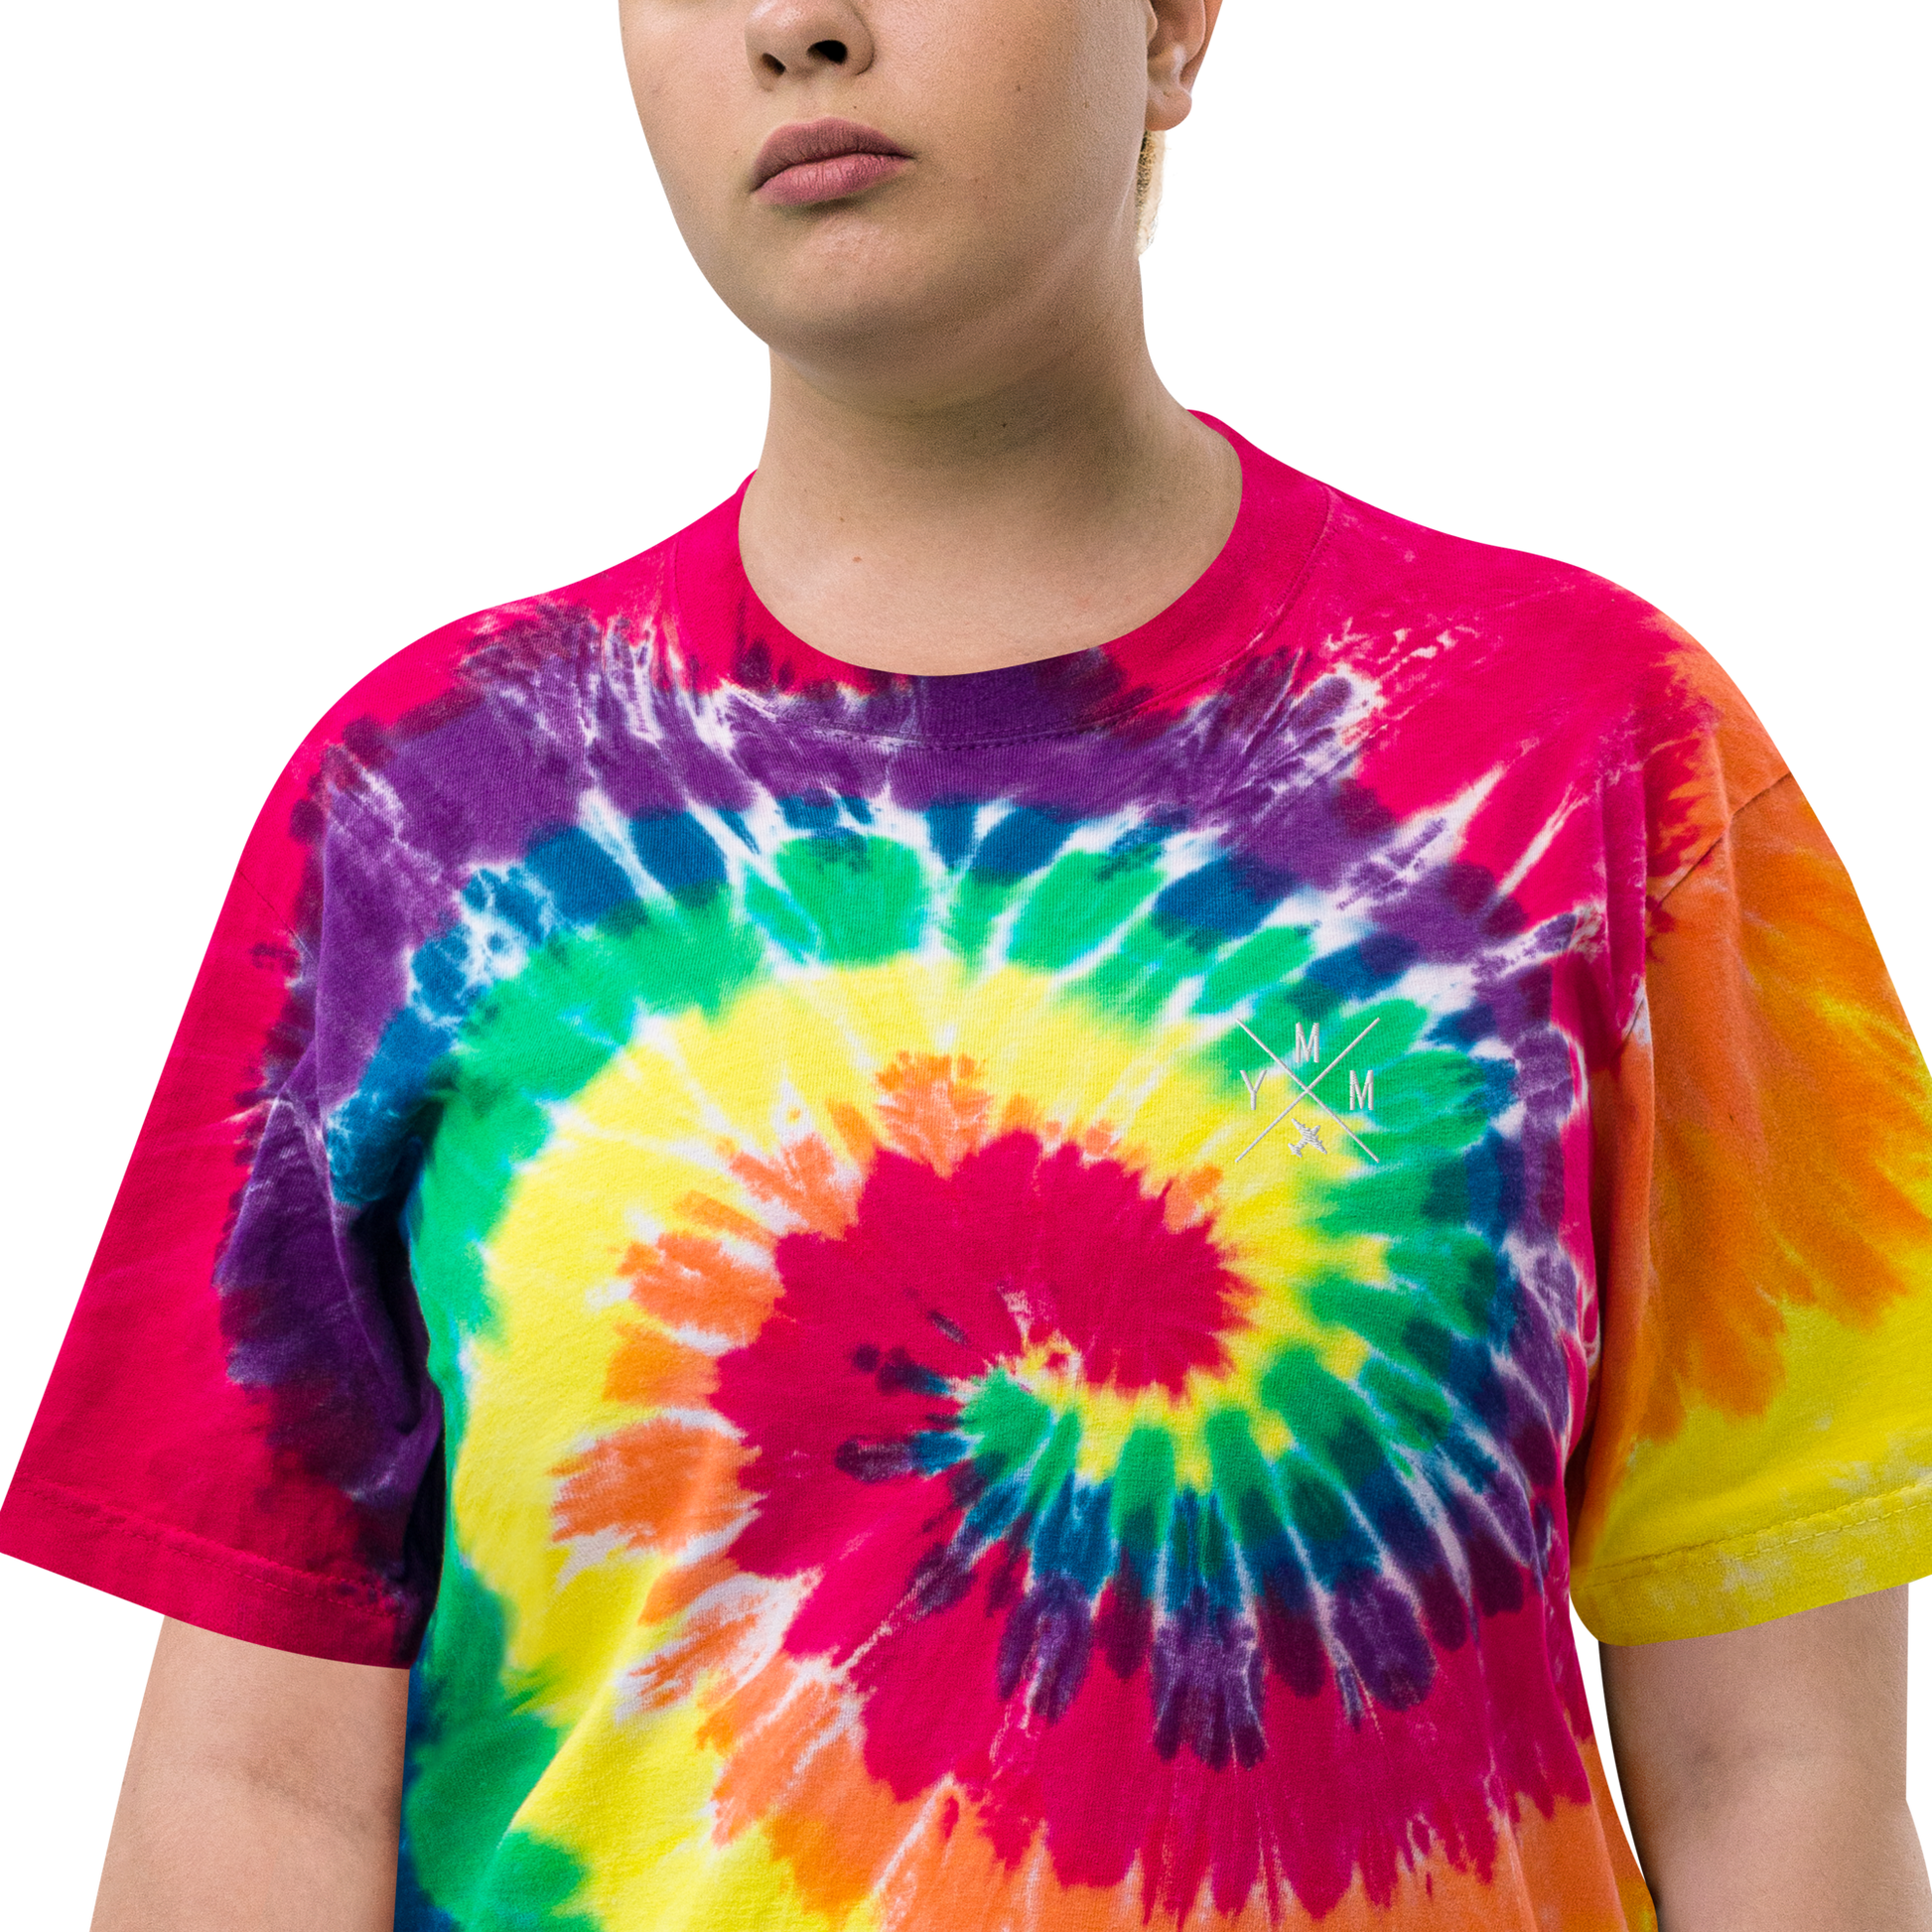 Crossed-X Oversized Tie-Dye T-Shirt • YMM Fort McMurray • YHM Designs - Image 15